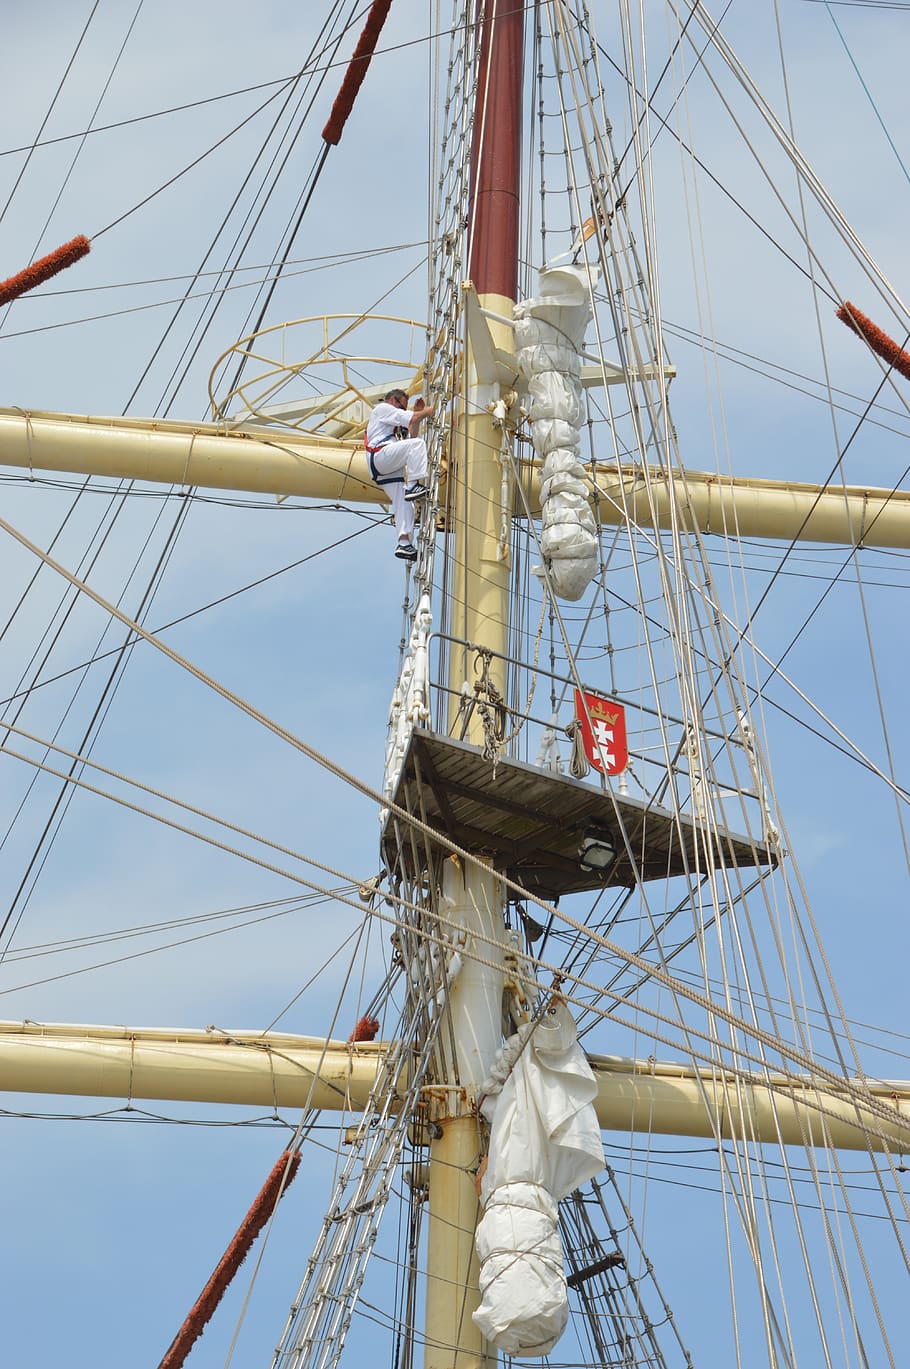 rope, square, sails, mast, rigging, poles, standing rigging, shrouds, strings, gabiers